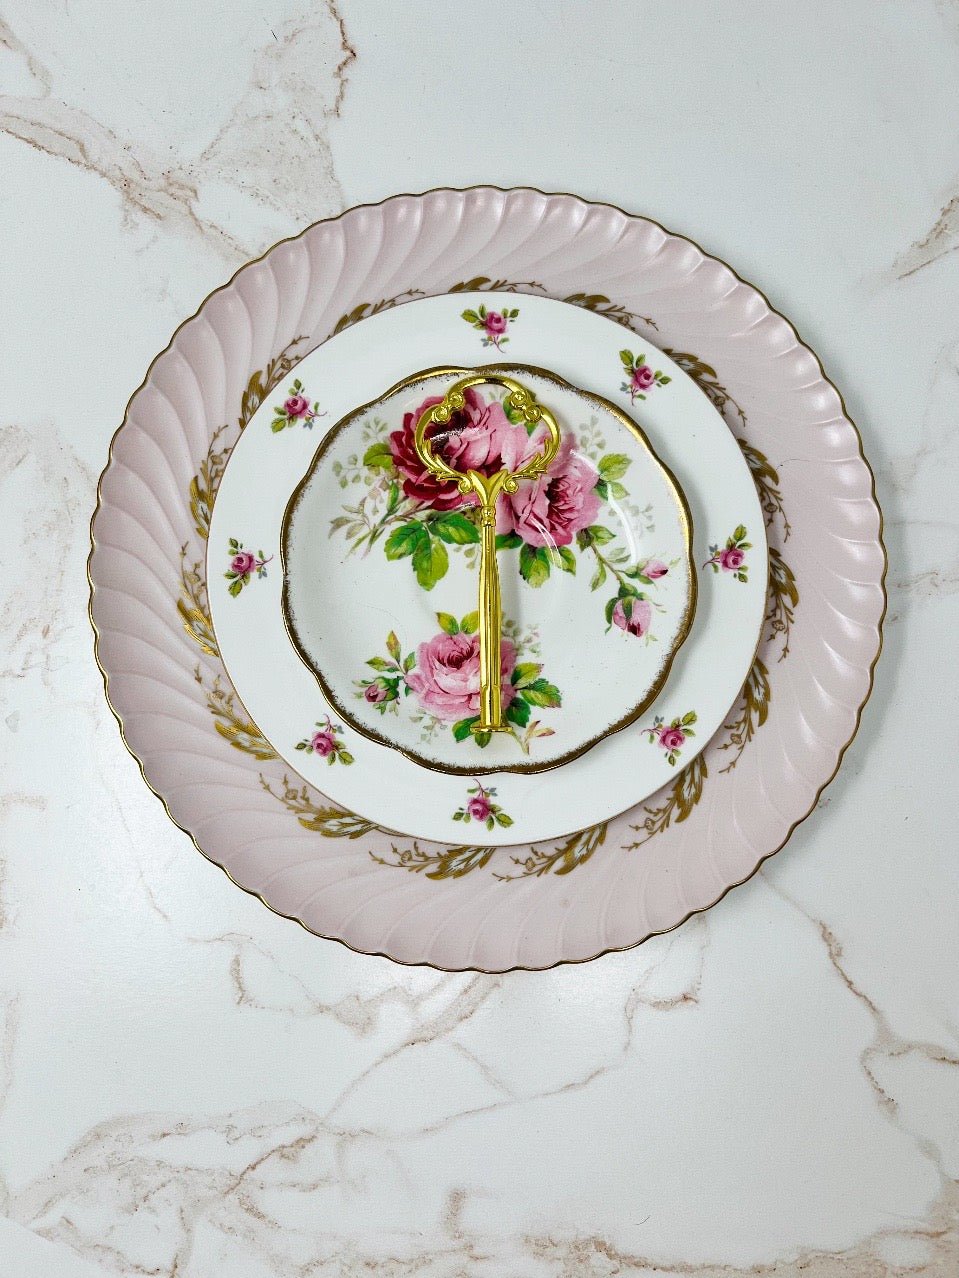 Tray of the Day - Wednesday | The Brooklyn Teacup - The Brooklyn Teacup